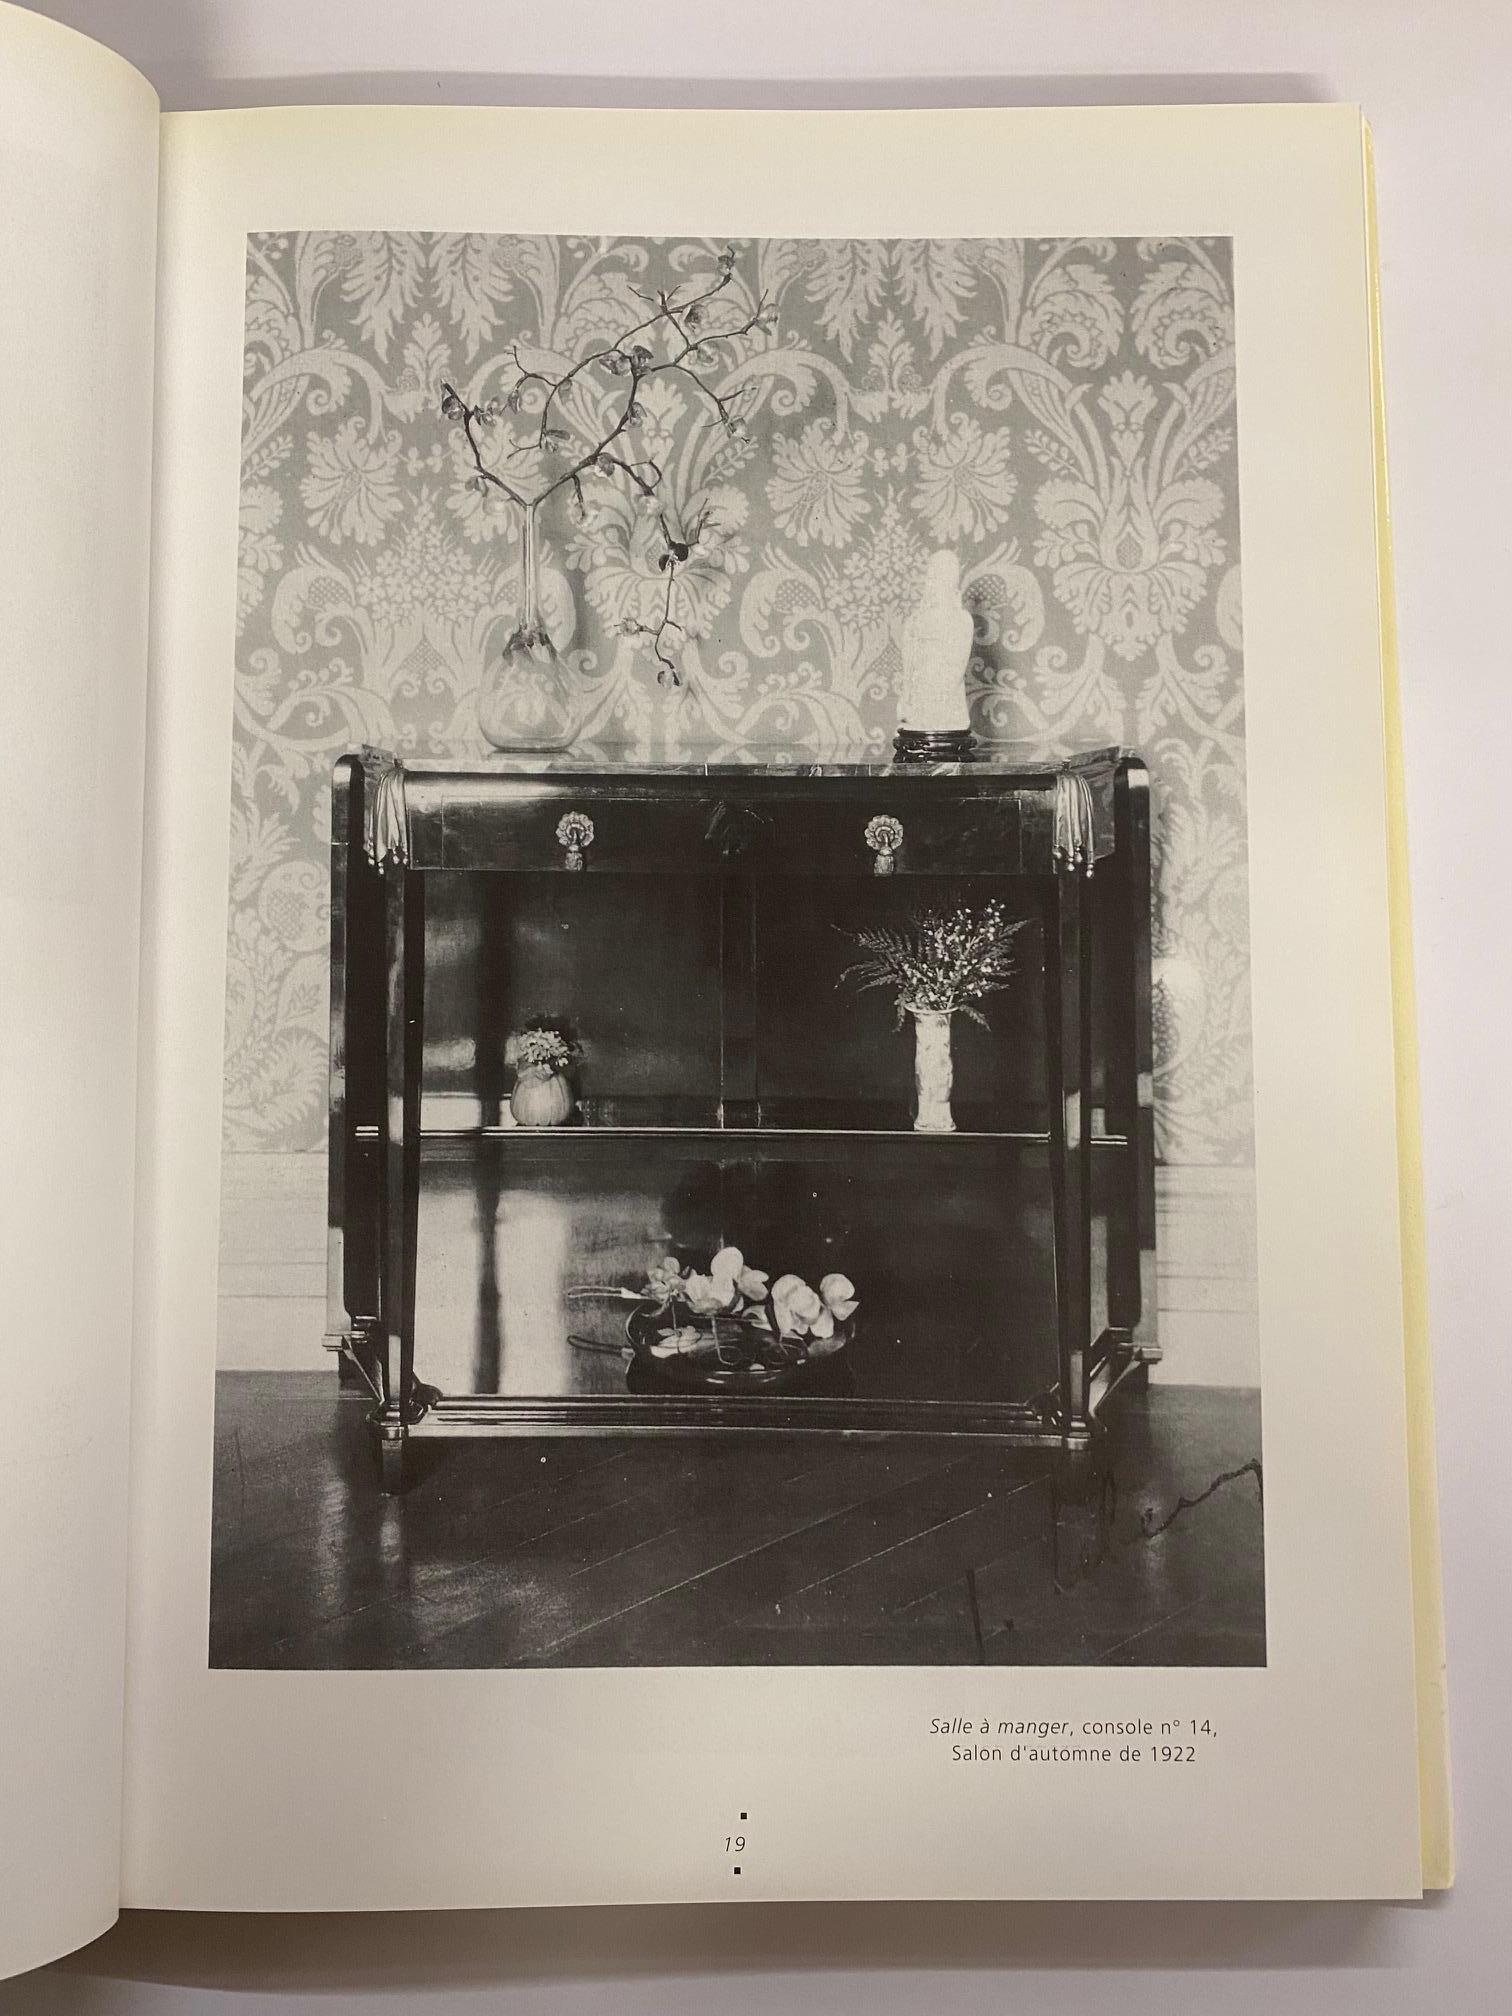 Hard back book with dustjacket in very good condition. 191 pages lavishly illustrated throughout with colour and black & white photographs which show the interior designs and furniture by Jules et Andre Leleu. Text is in French. A very good copy of